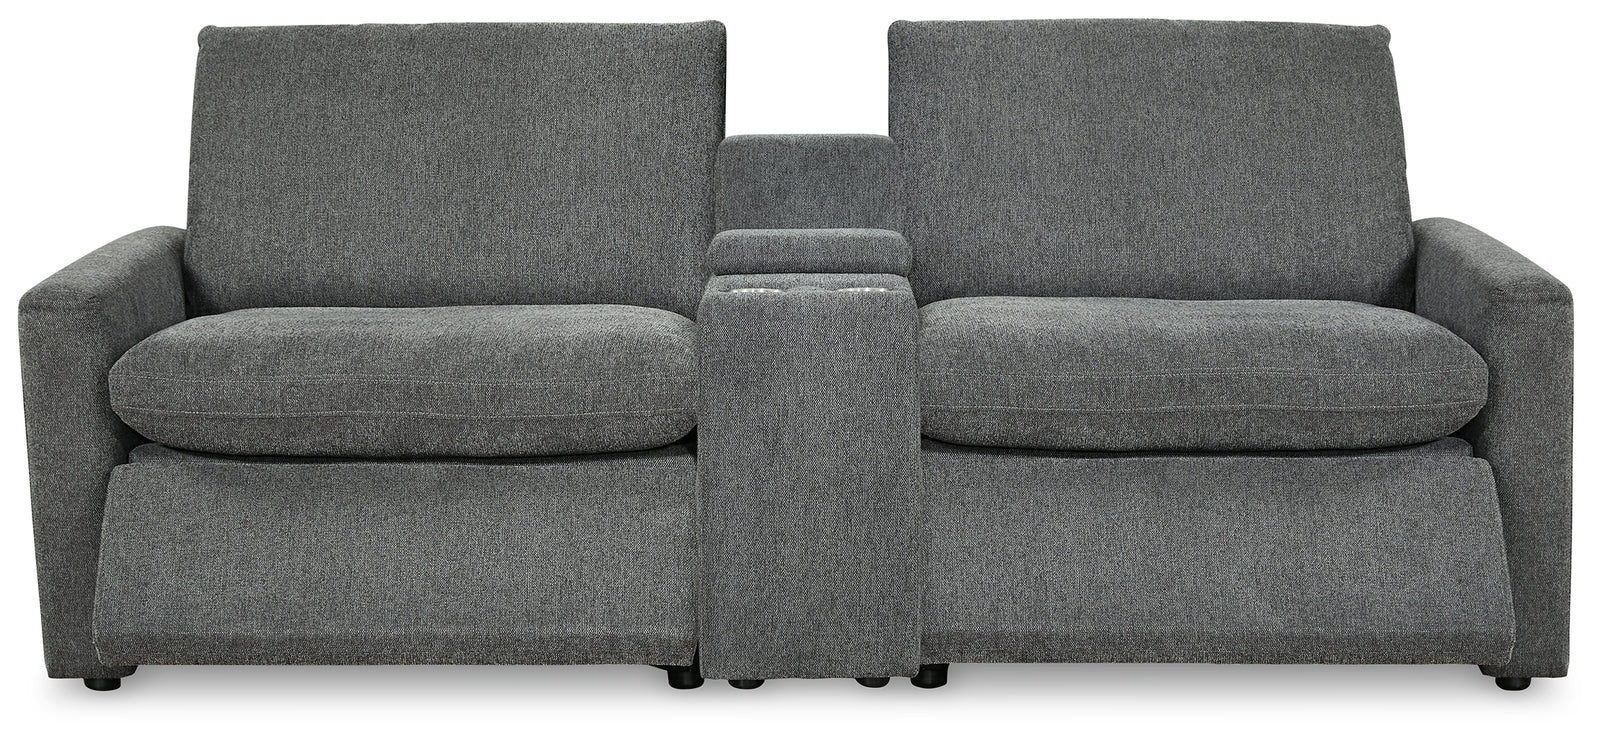 Hartsdale Granite 3-Piece Power Reclining Sectional